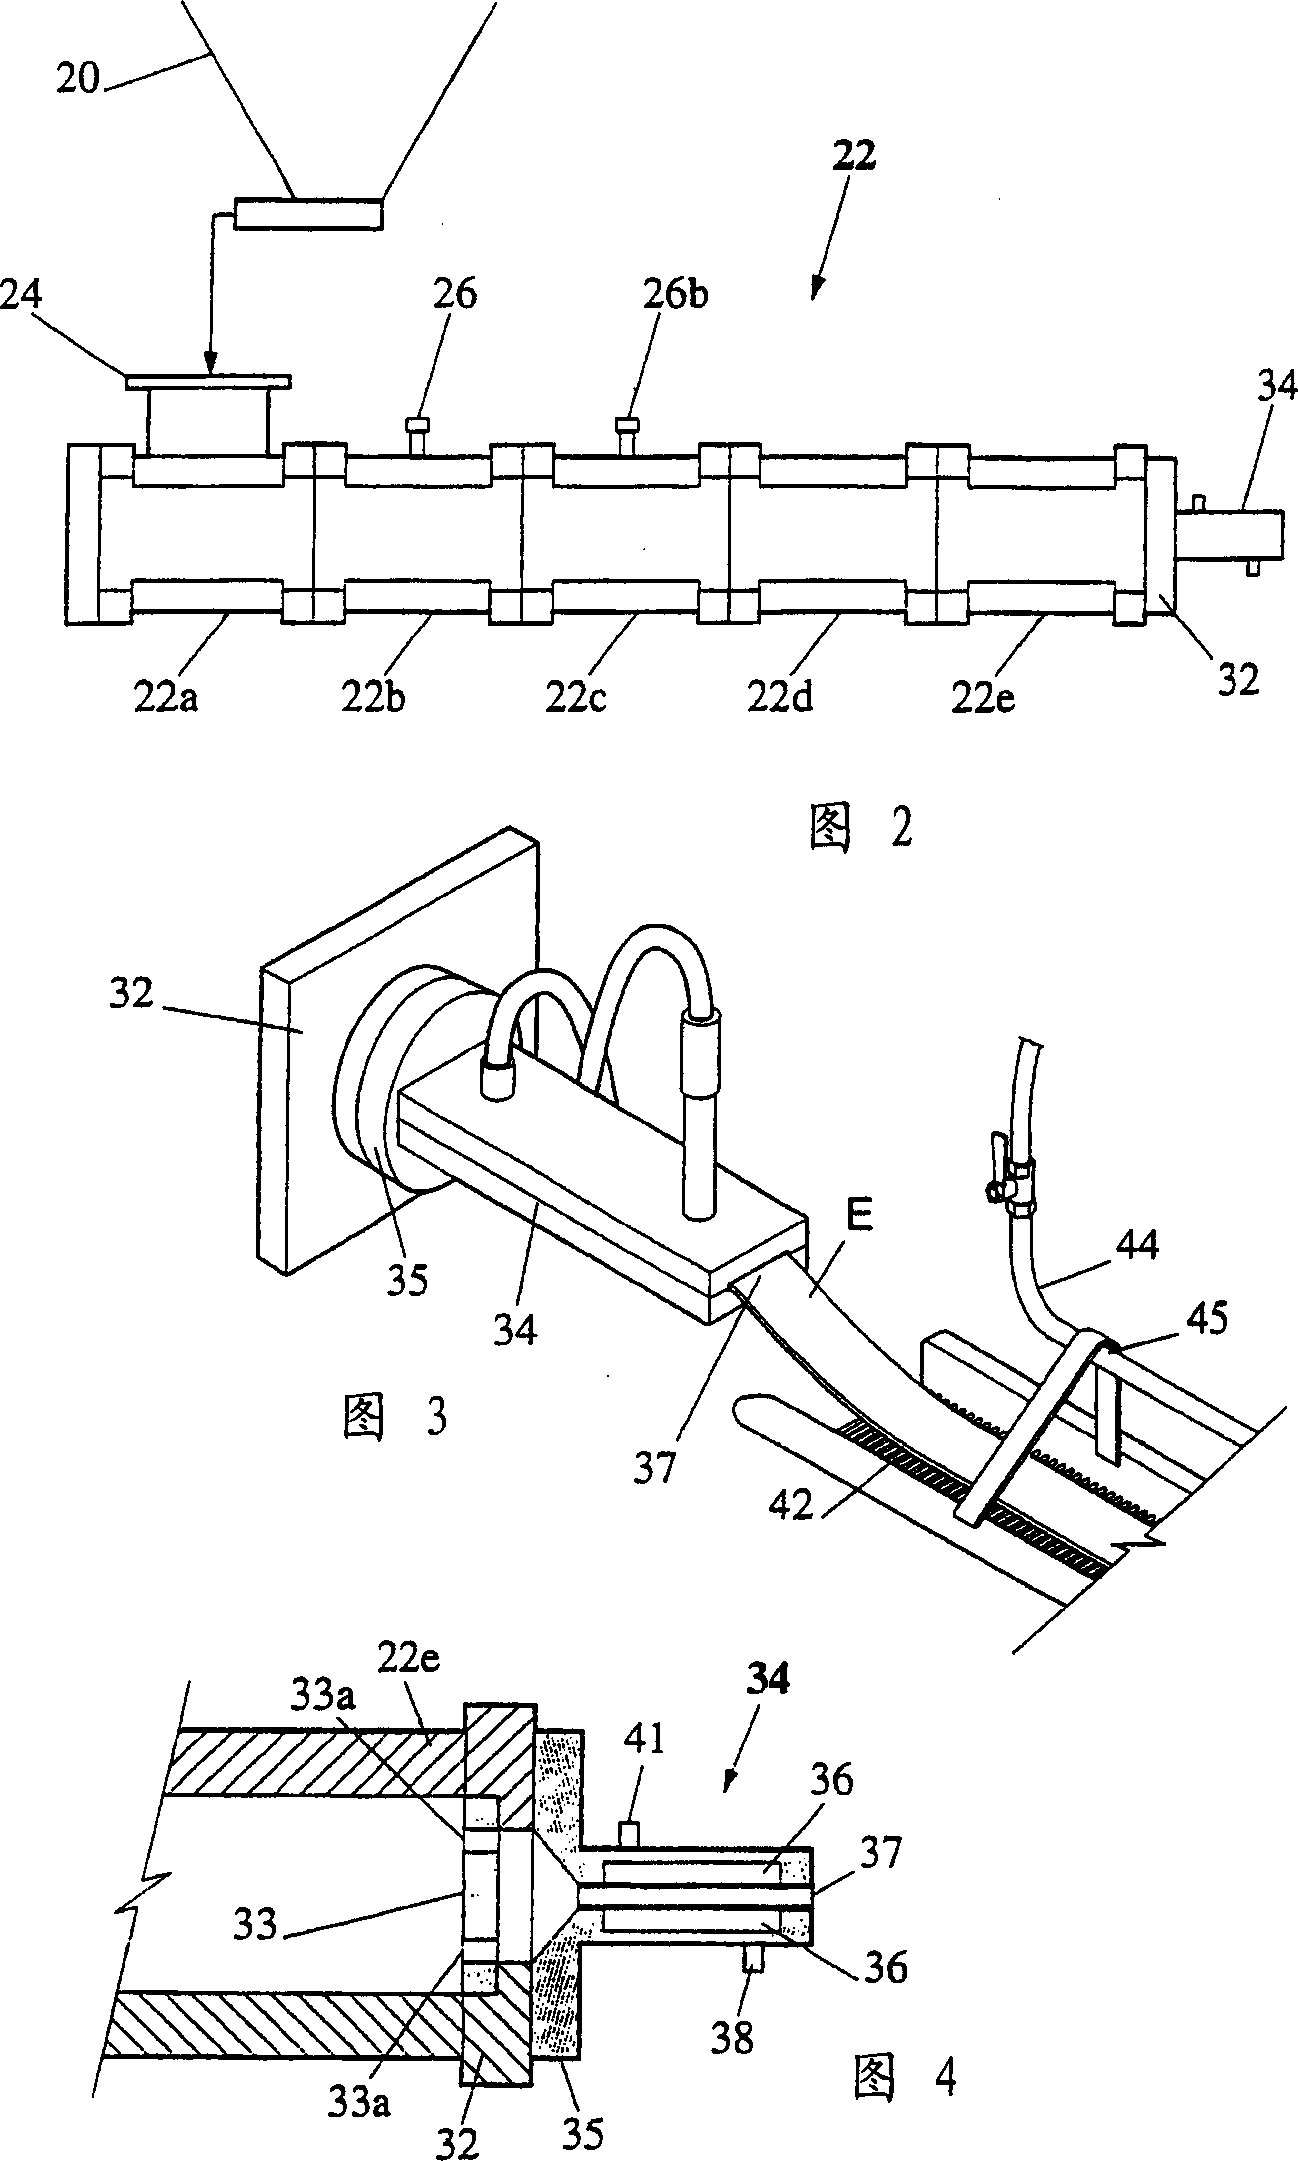 Method and apparatus for the manufacture of meat analogue product